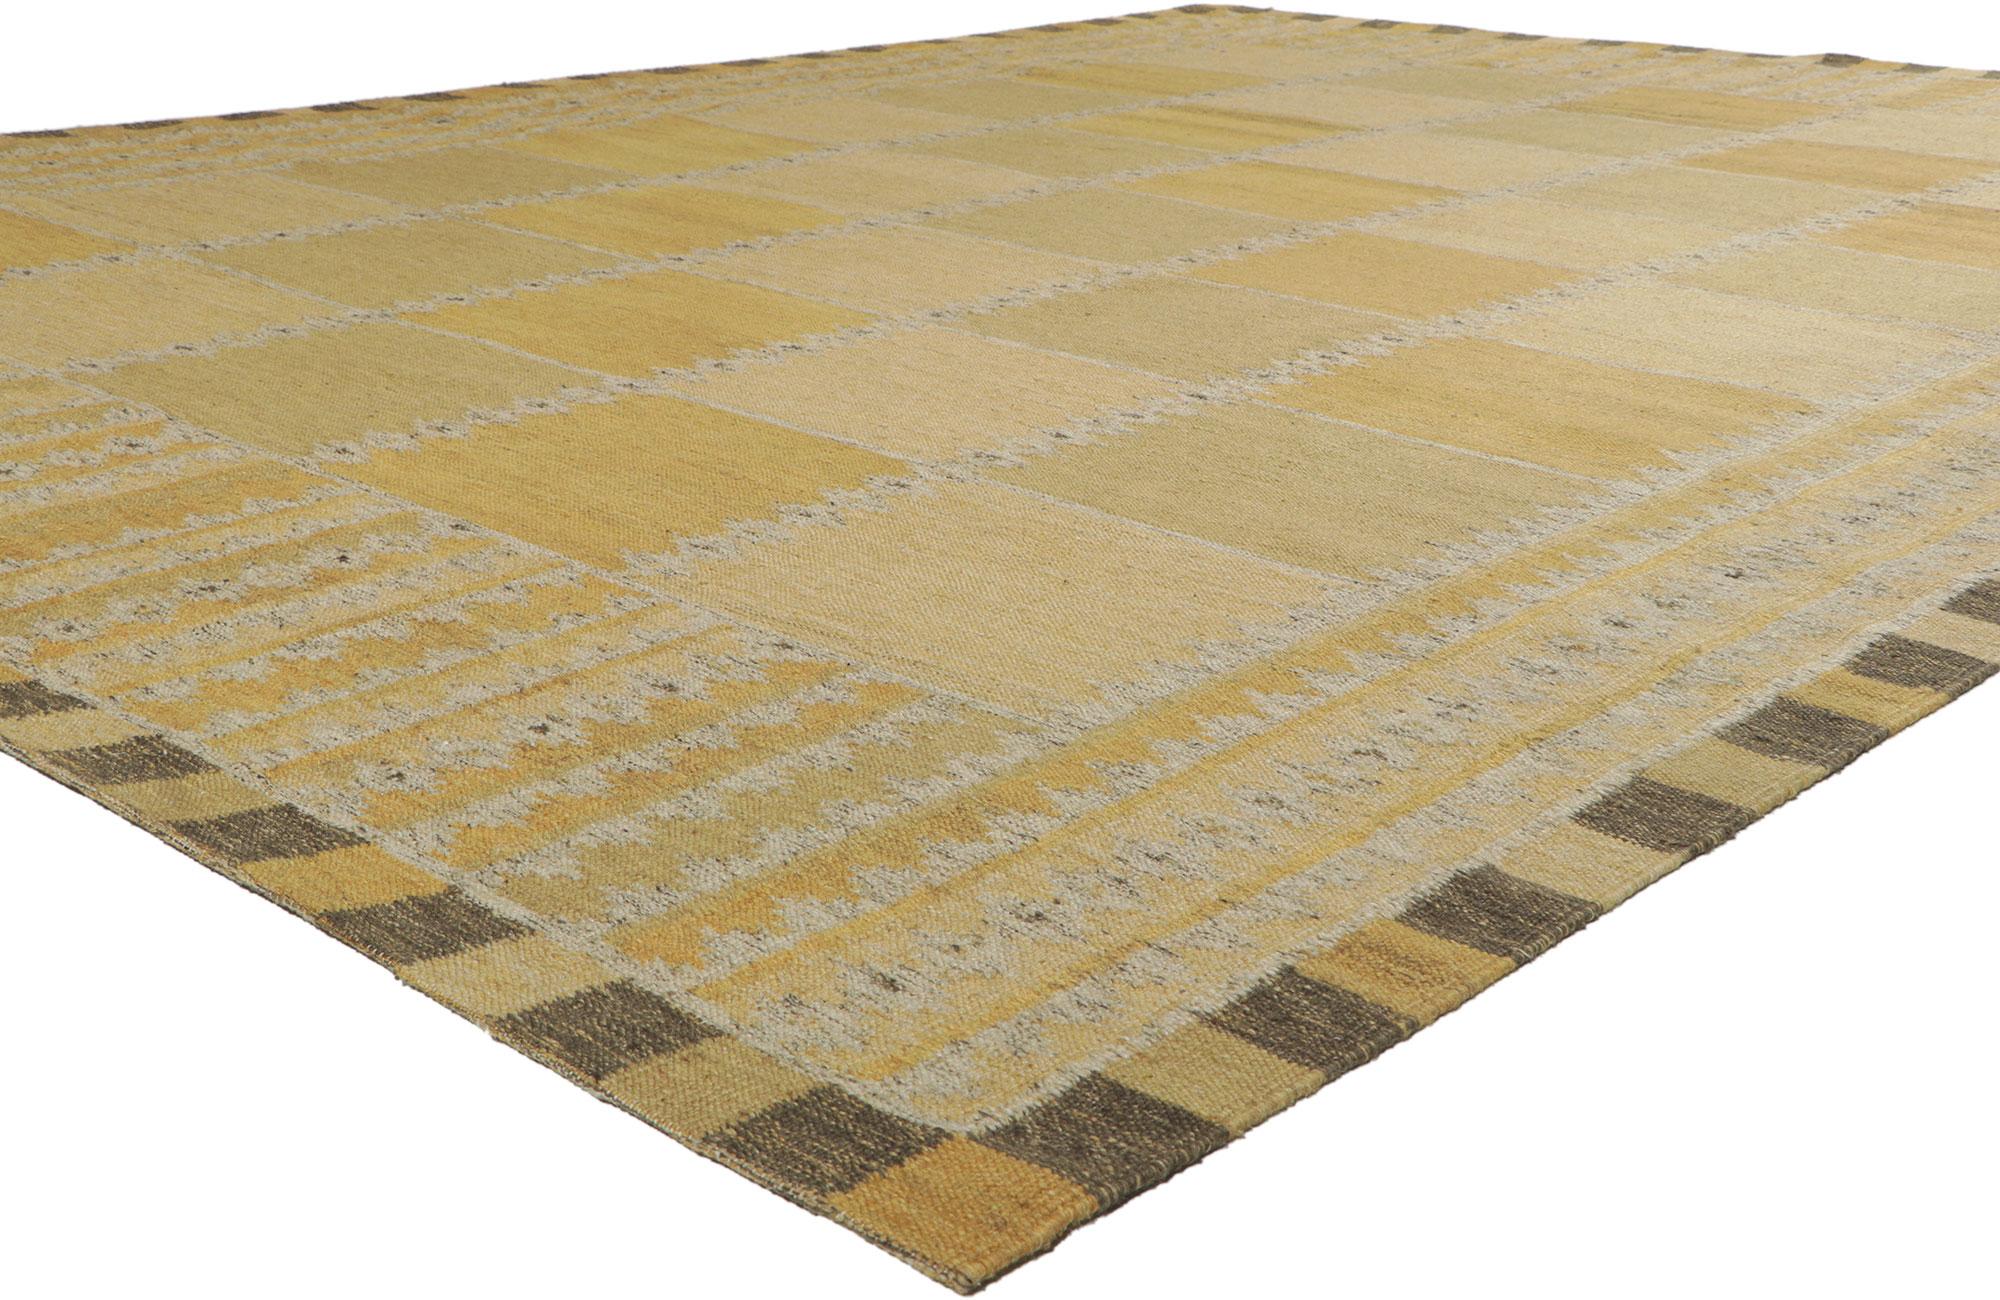 30854 New Swedish Marianne Richter Inspired Kilim rug, 10'02 x 13'05. With its simplicity and geometric design, this hand-woven wool Swedish inspired Kilim rug provides a feeling of cozy contentment without the clutter. The abrashed golden striated